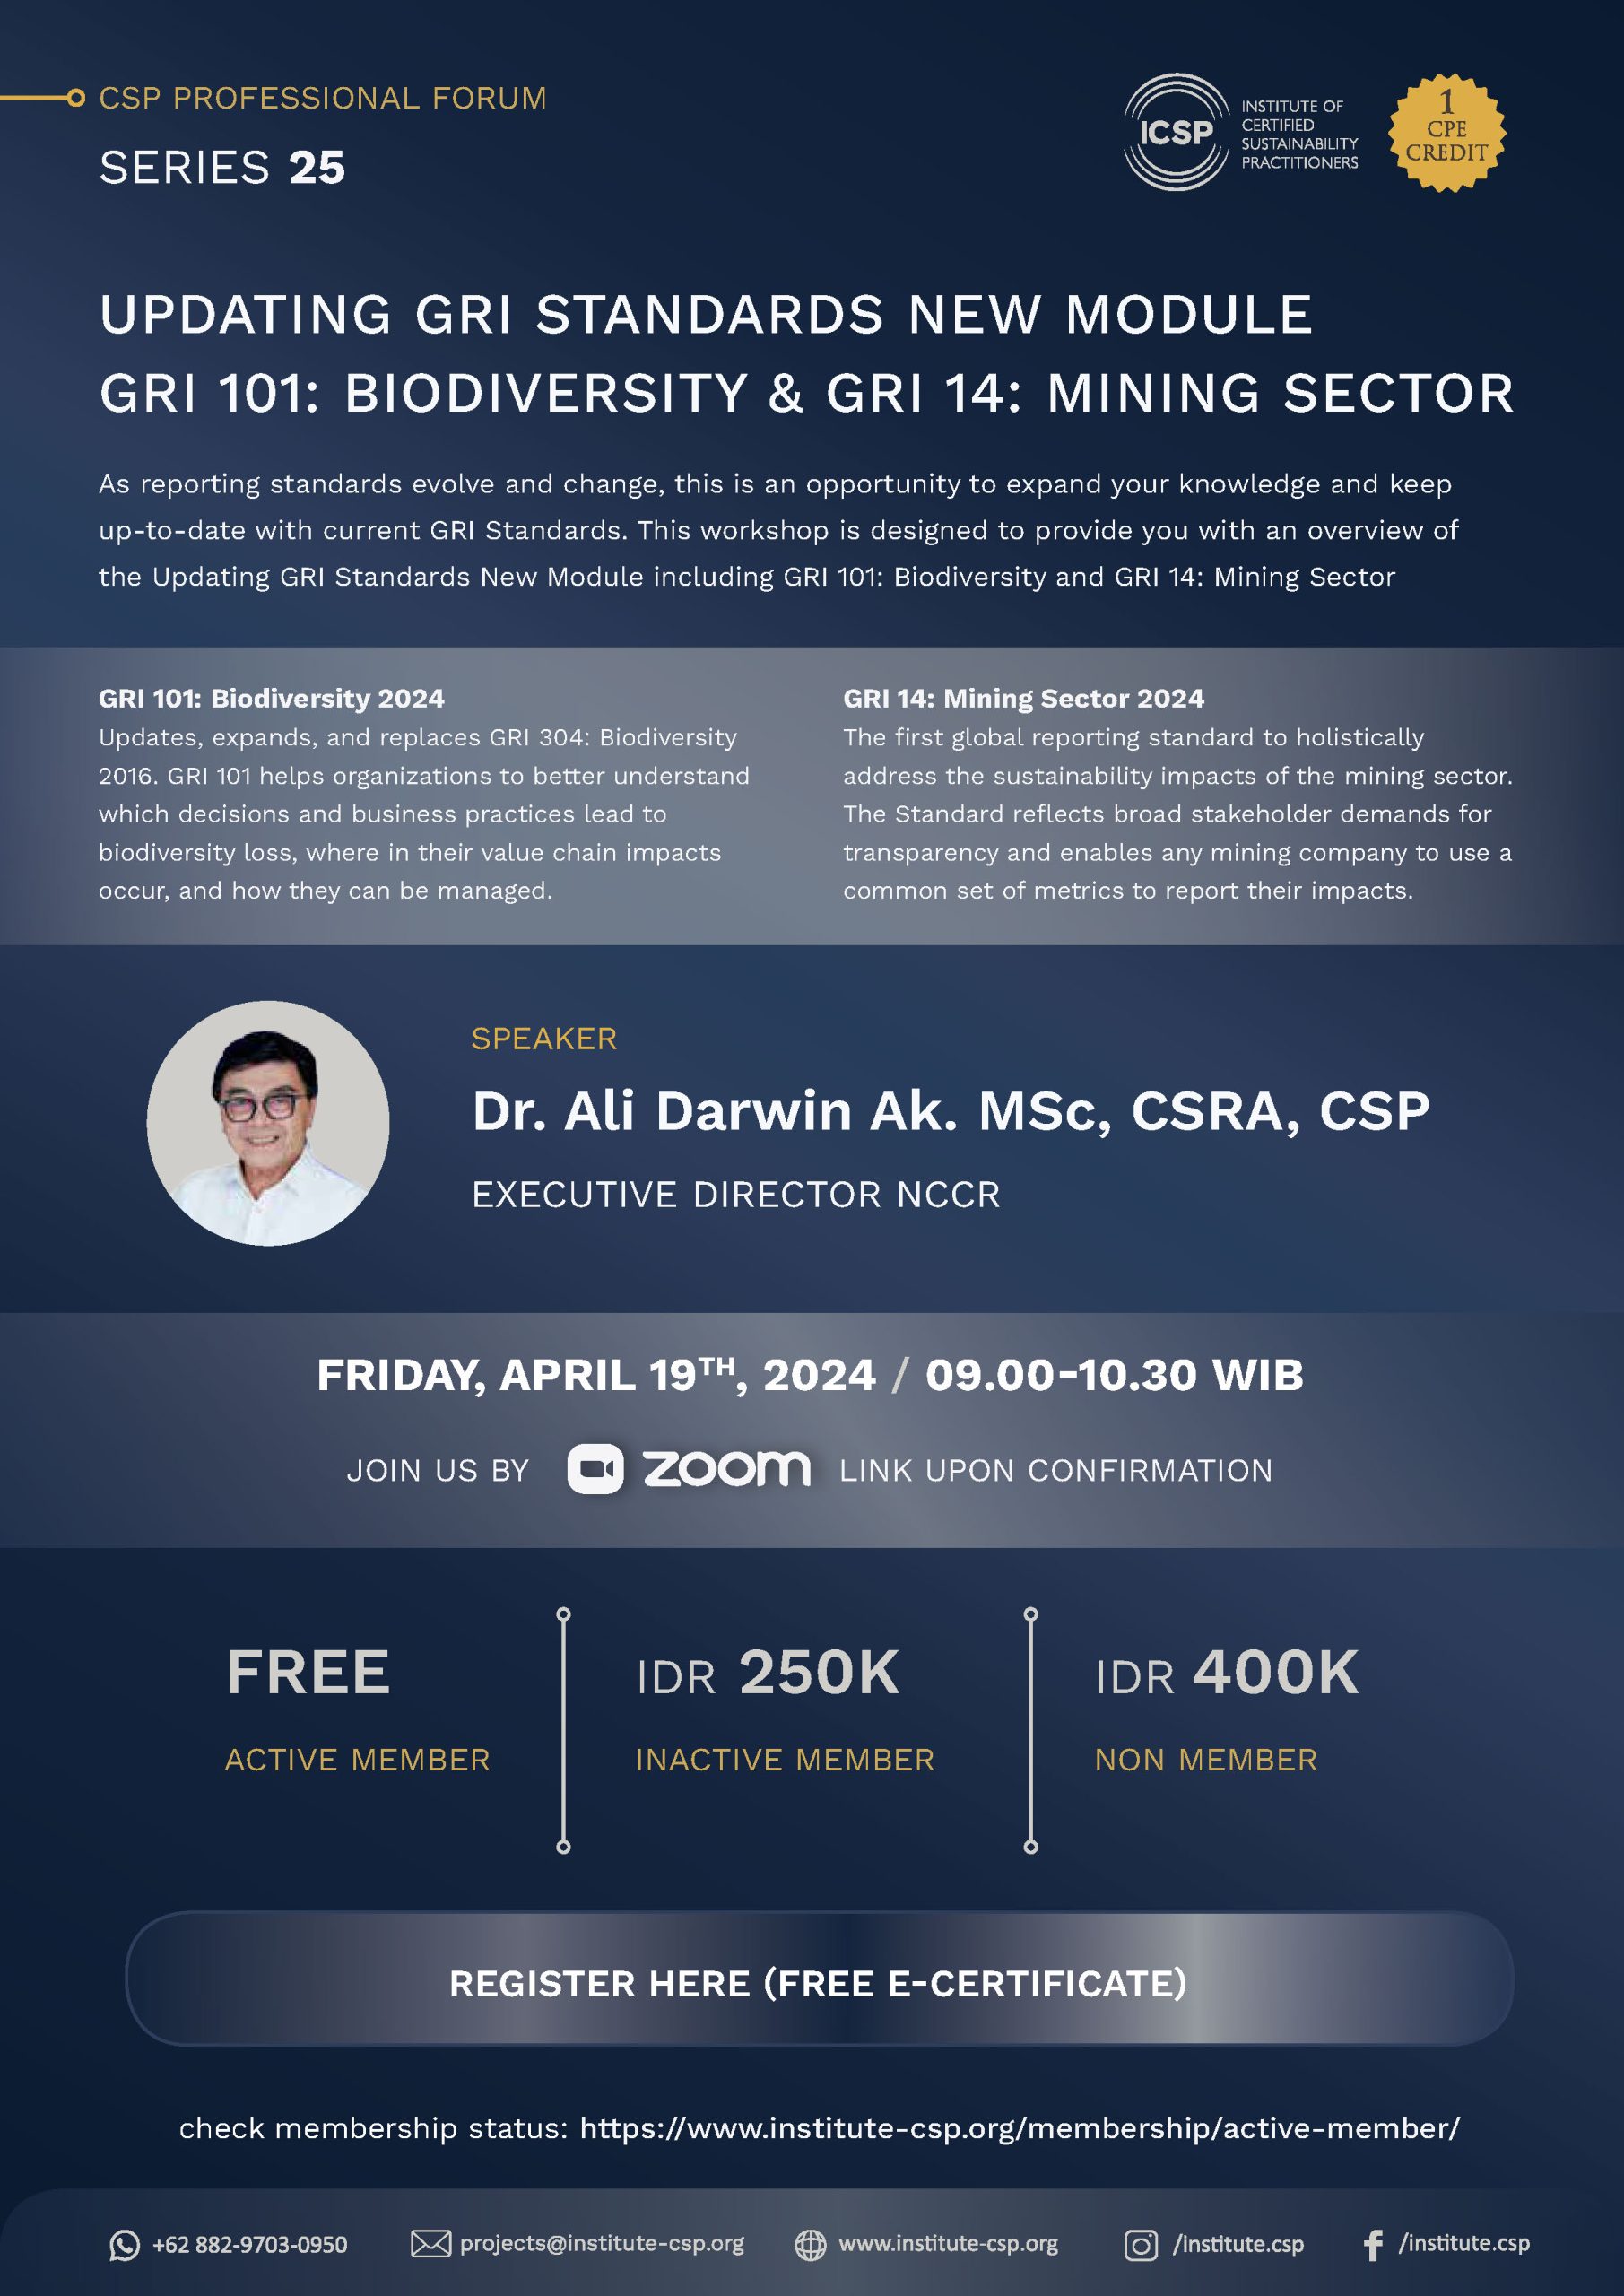 As reporting standards evolve and change, this is an opportunity to expand your knowledge and keep up-to-date with current GRI Standards. This workshop is designed to provide you with an overview of the Updating GRI Standards New Module including GRI 101: Biodiversity and GRI 14: Mining Sector